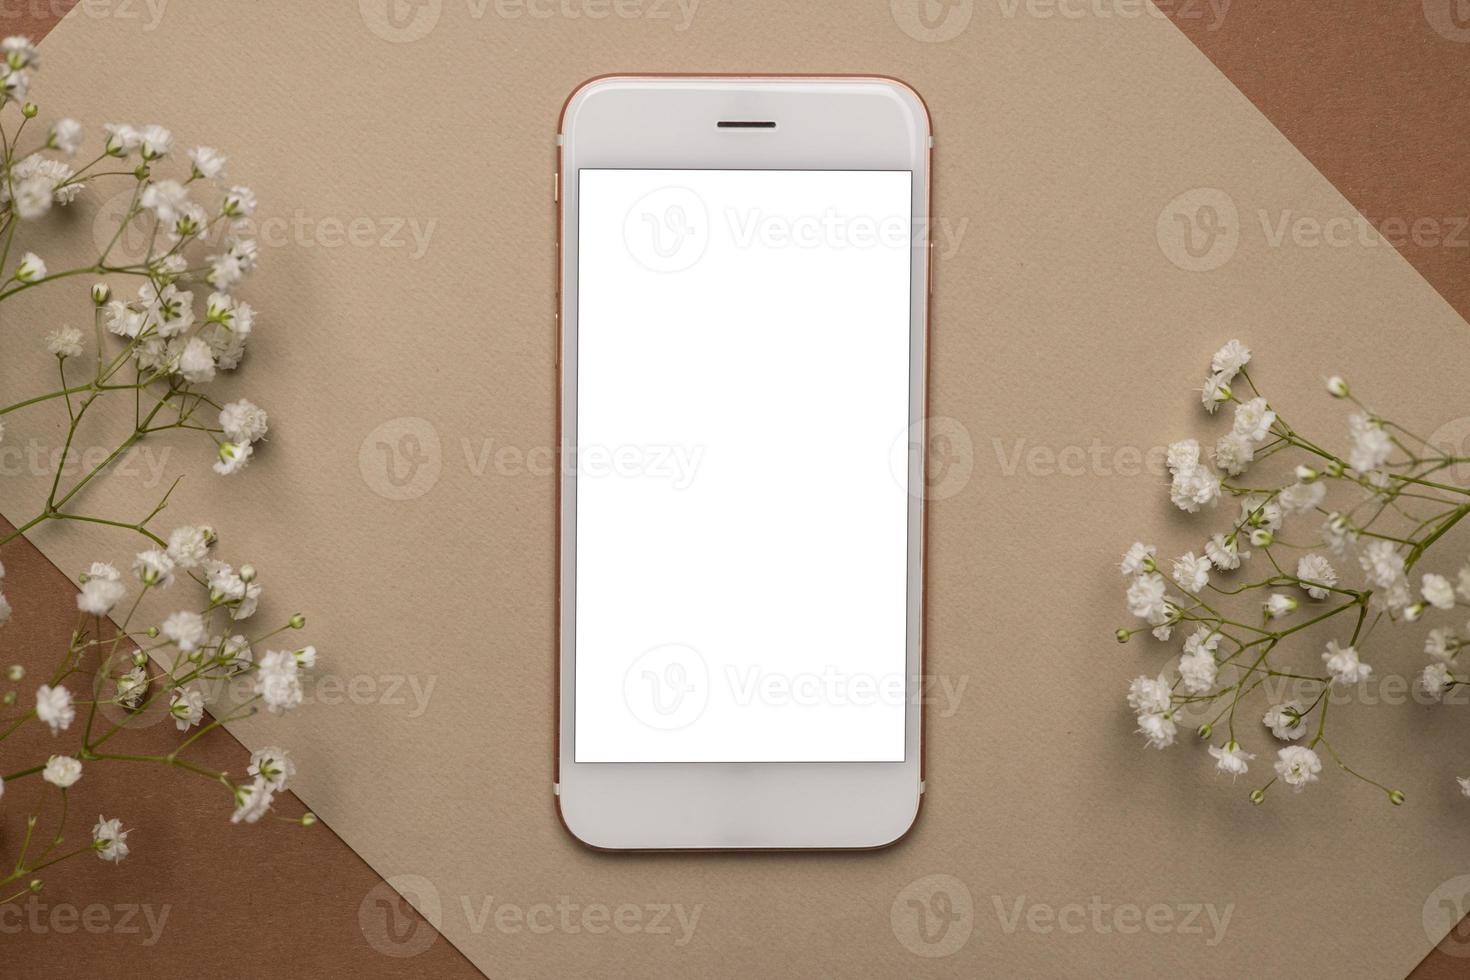 Mobile phone with white screen and dry flower branch and stone on a light brown background. Trend, minimal concept with copyspace photo